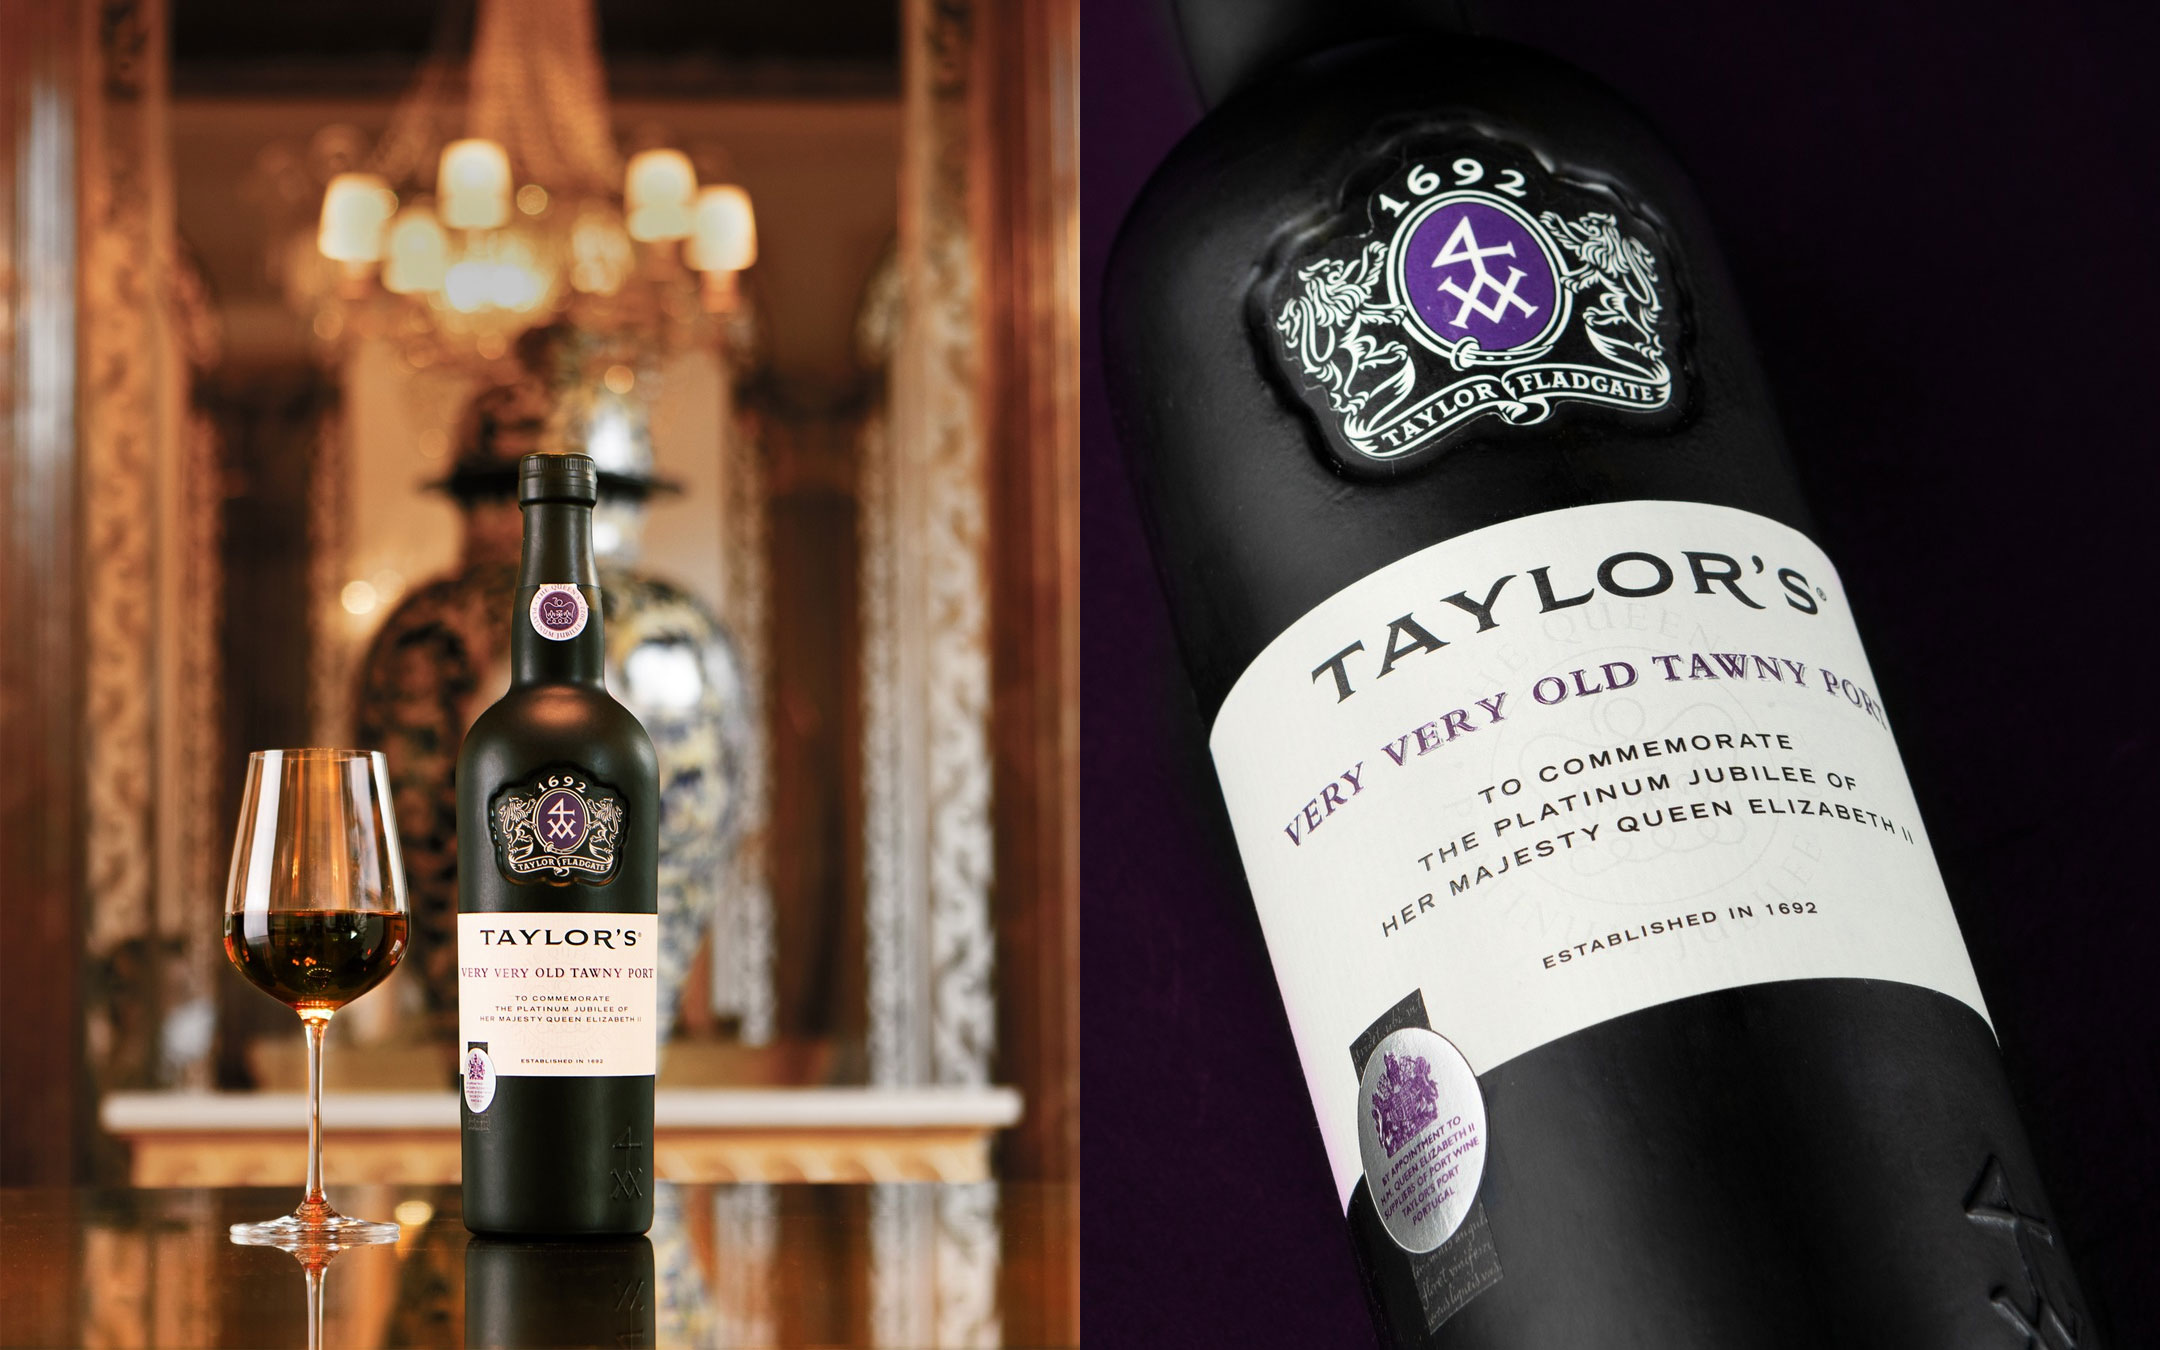 Taylor’s Very Very Old Tawny Port